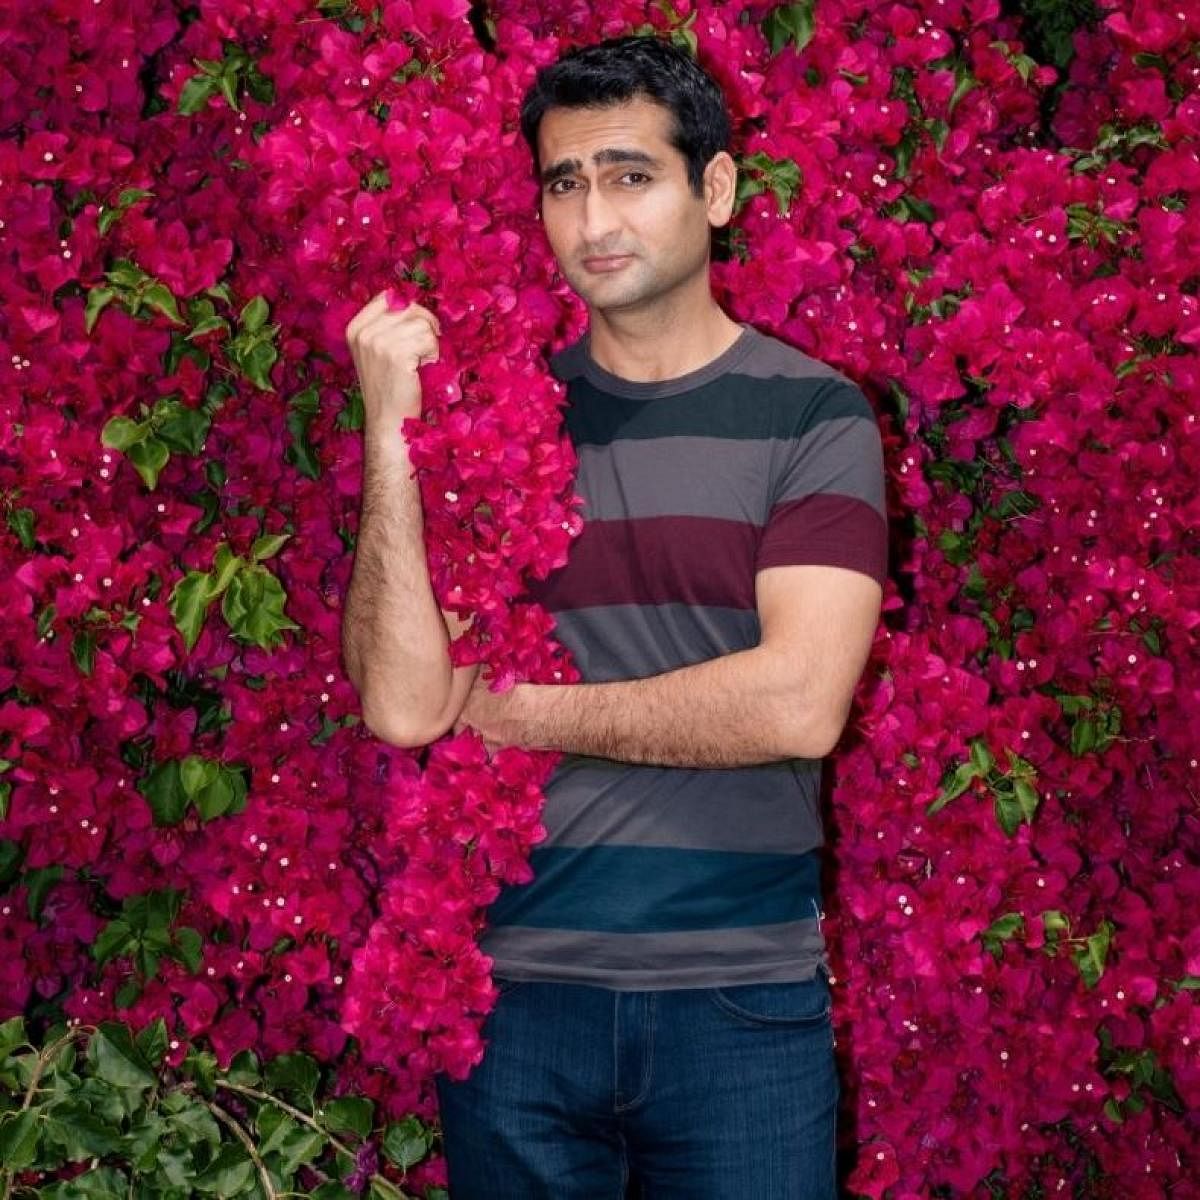 Kumail Nanjiani to play journalist in political thriller 'The Independent'